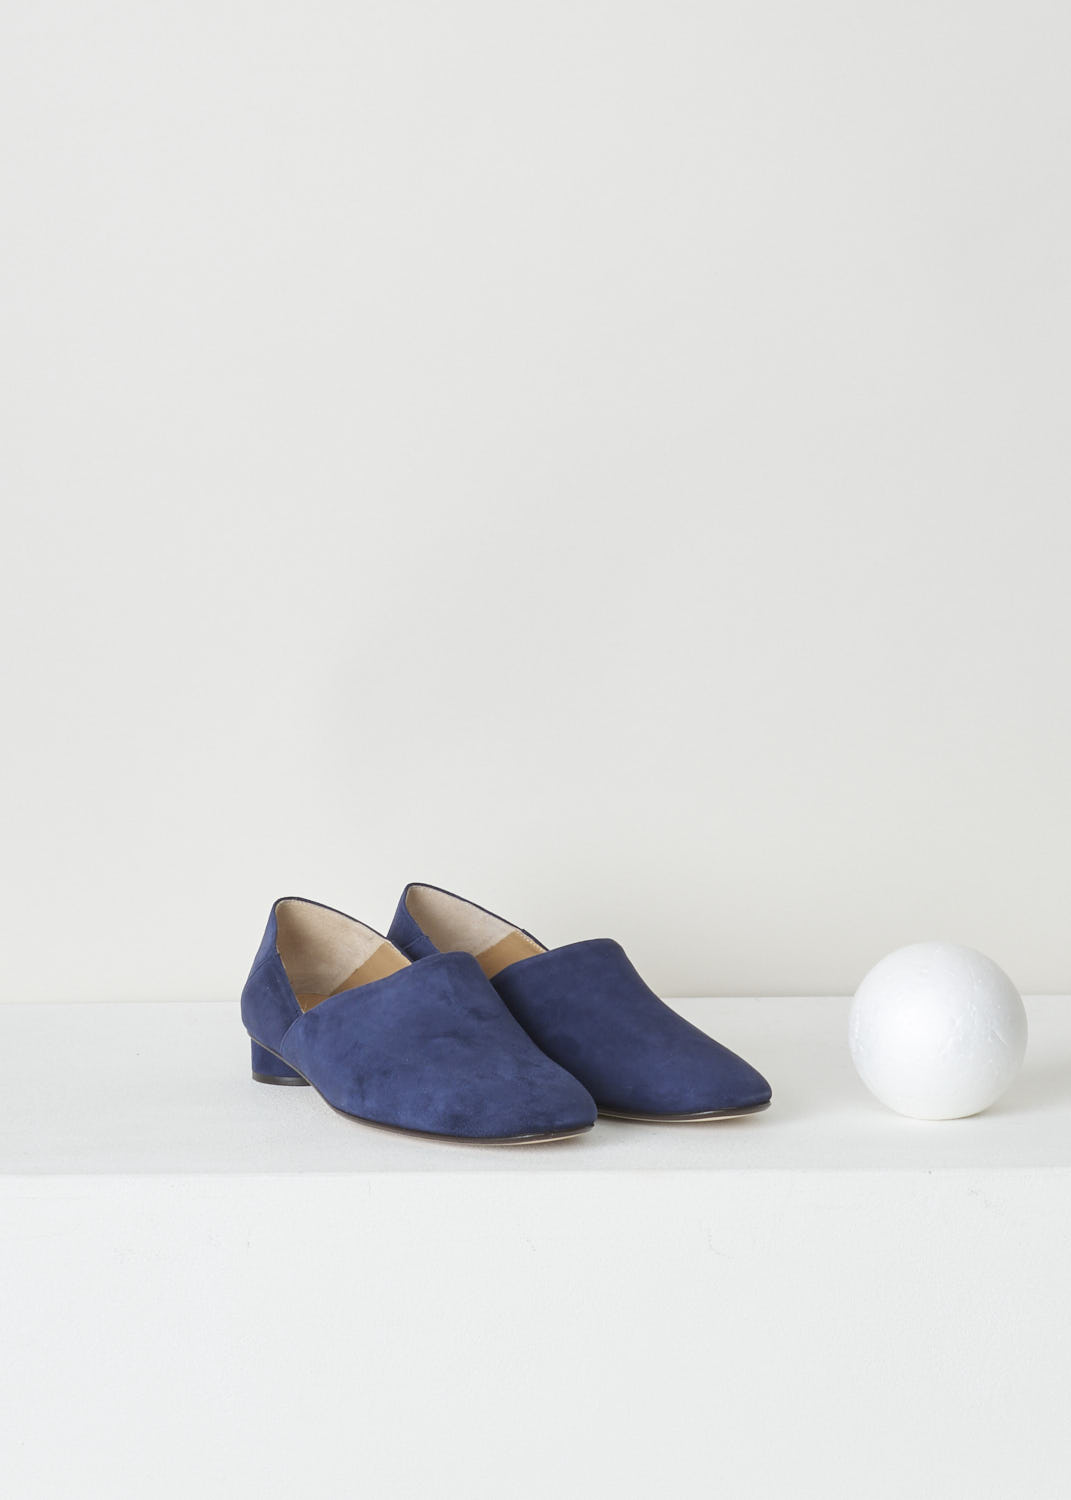 THE ROW, NAVY BLUE SUEDE SLIPPER, NOELLE_F1000_L25_NVY, Blue, Front, Minimalistic navy blue suede slipper. The slip-in model features a rounded toe vamp. The sober design is exactly what makes these shoes so beautiful.
